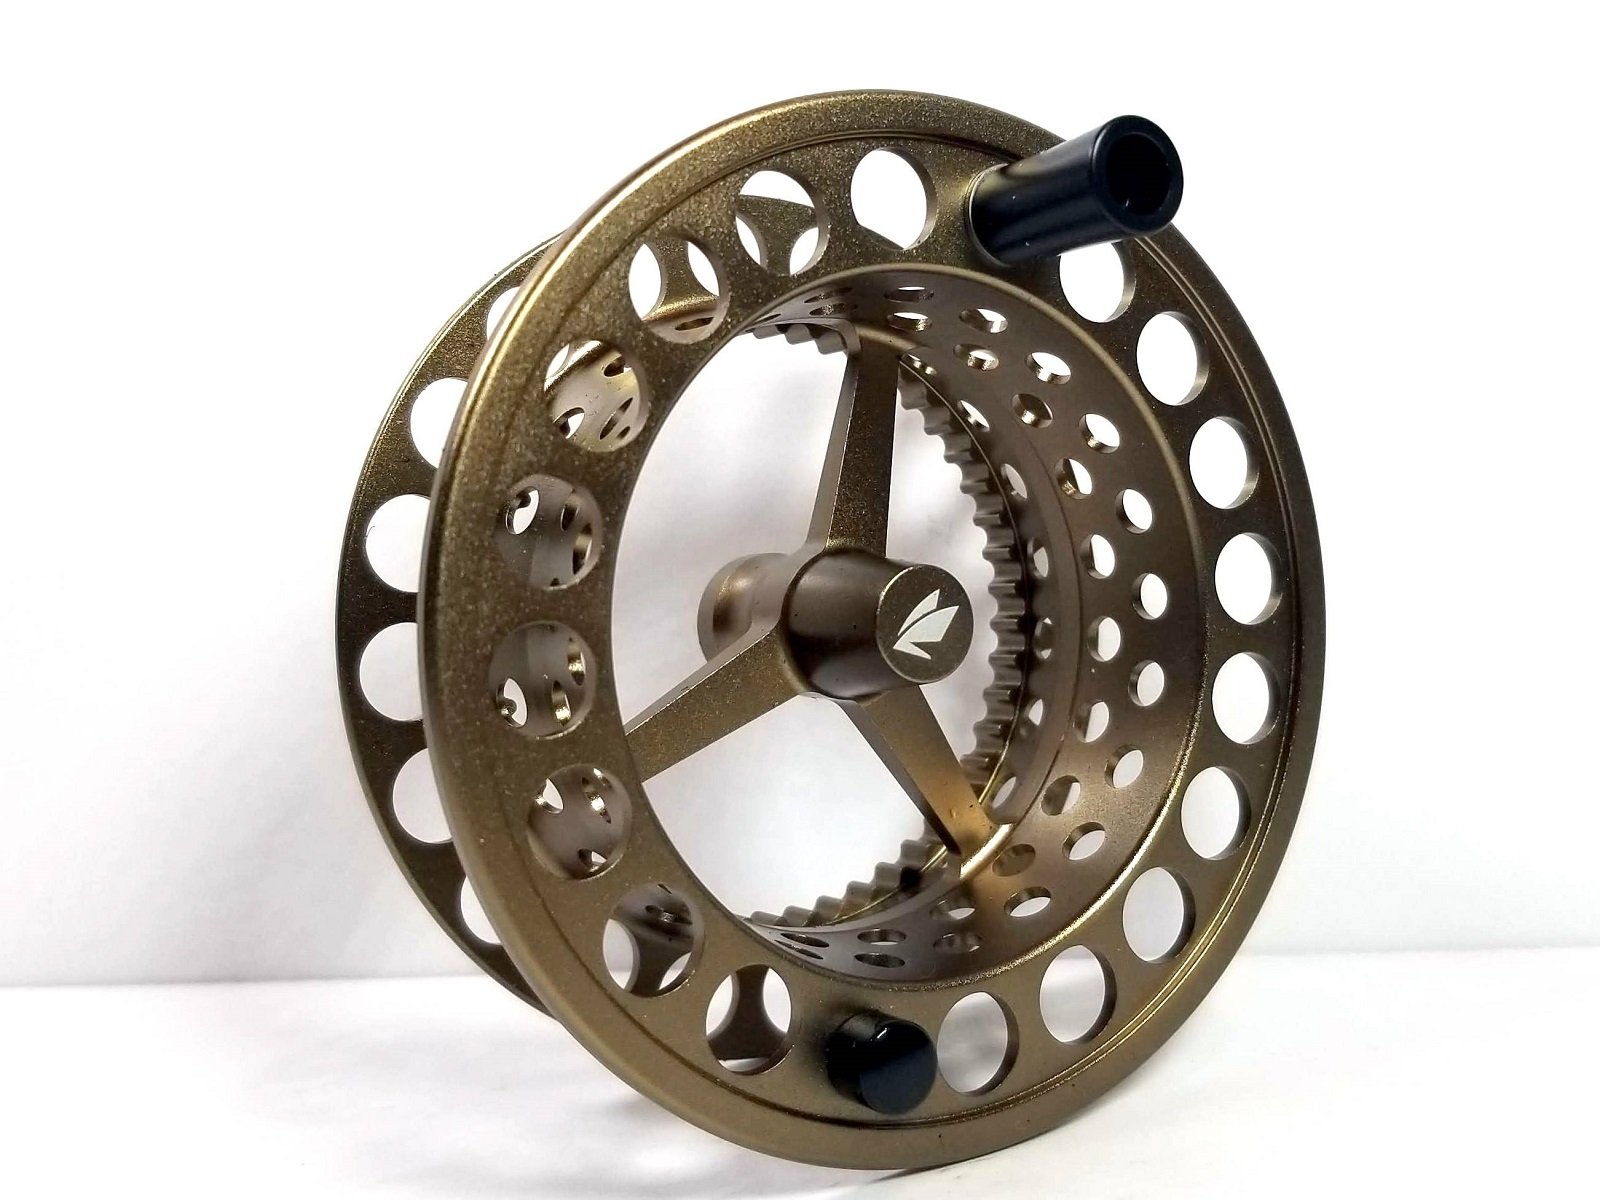 Sage Click IV (4-5 WT) Extra Spool in Bronze